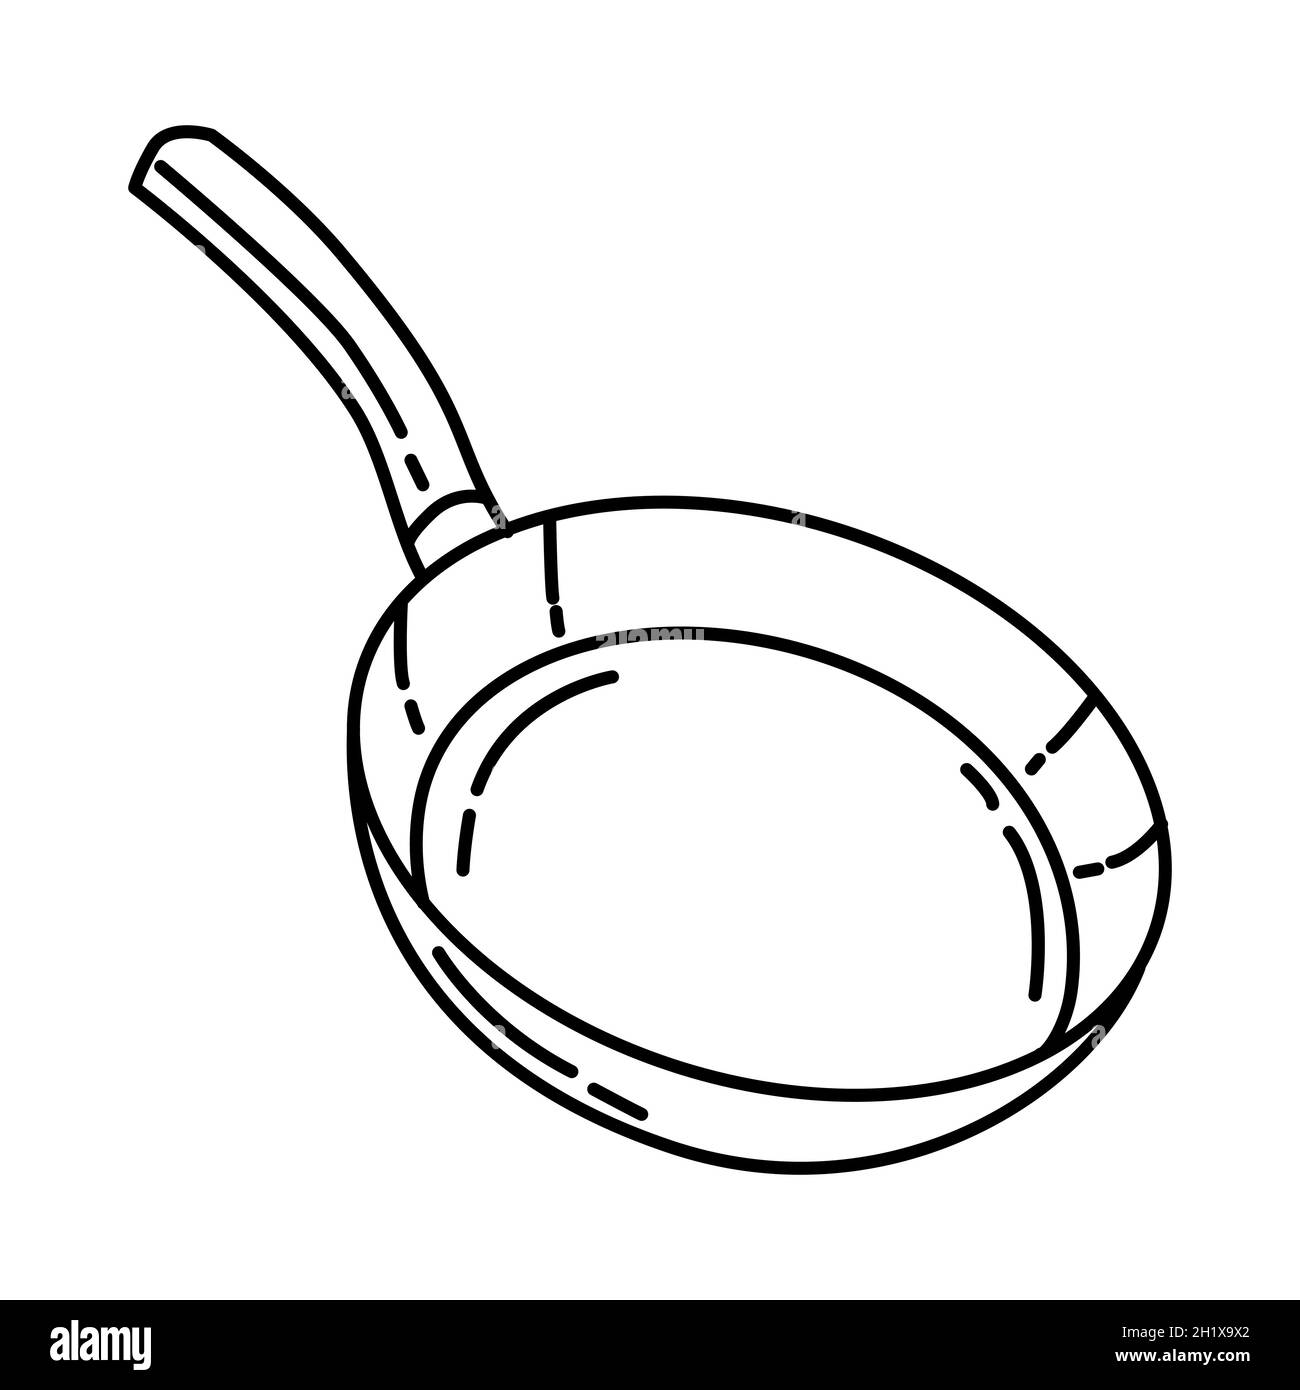 Pan Drawing and Coloring - Cooking Utensils Drawing and Coloring 